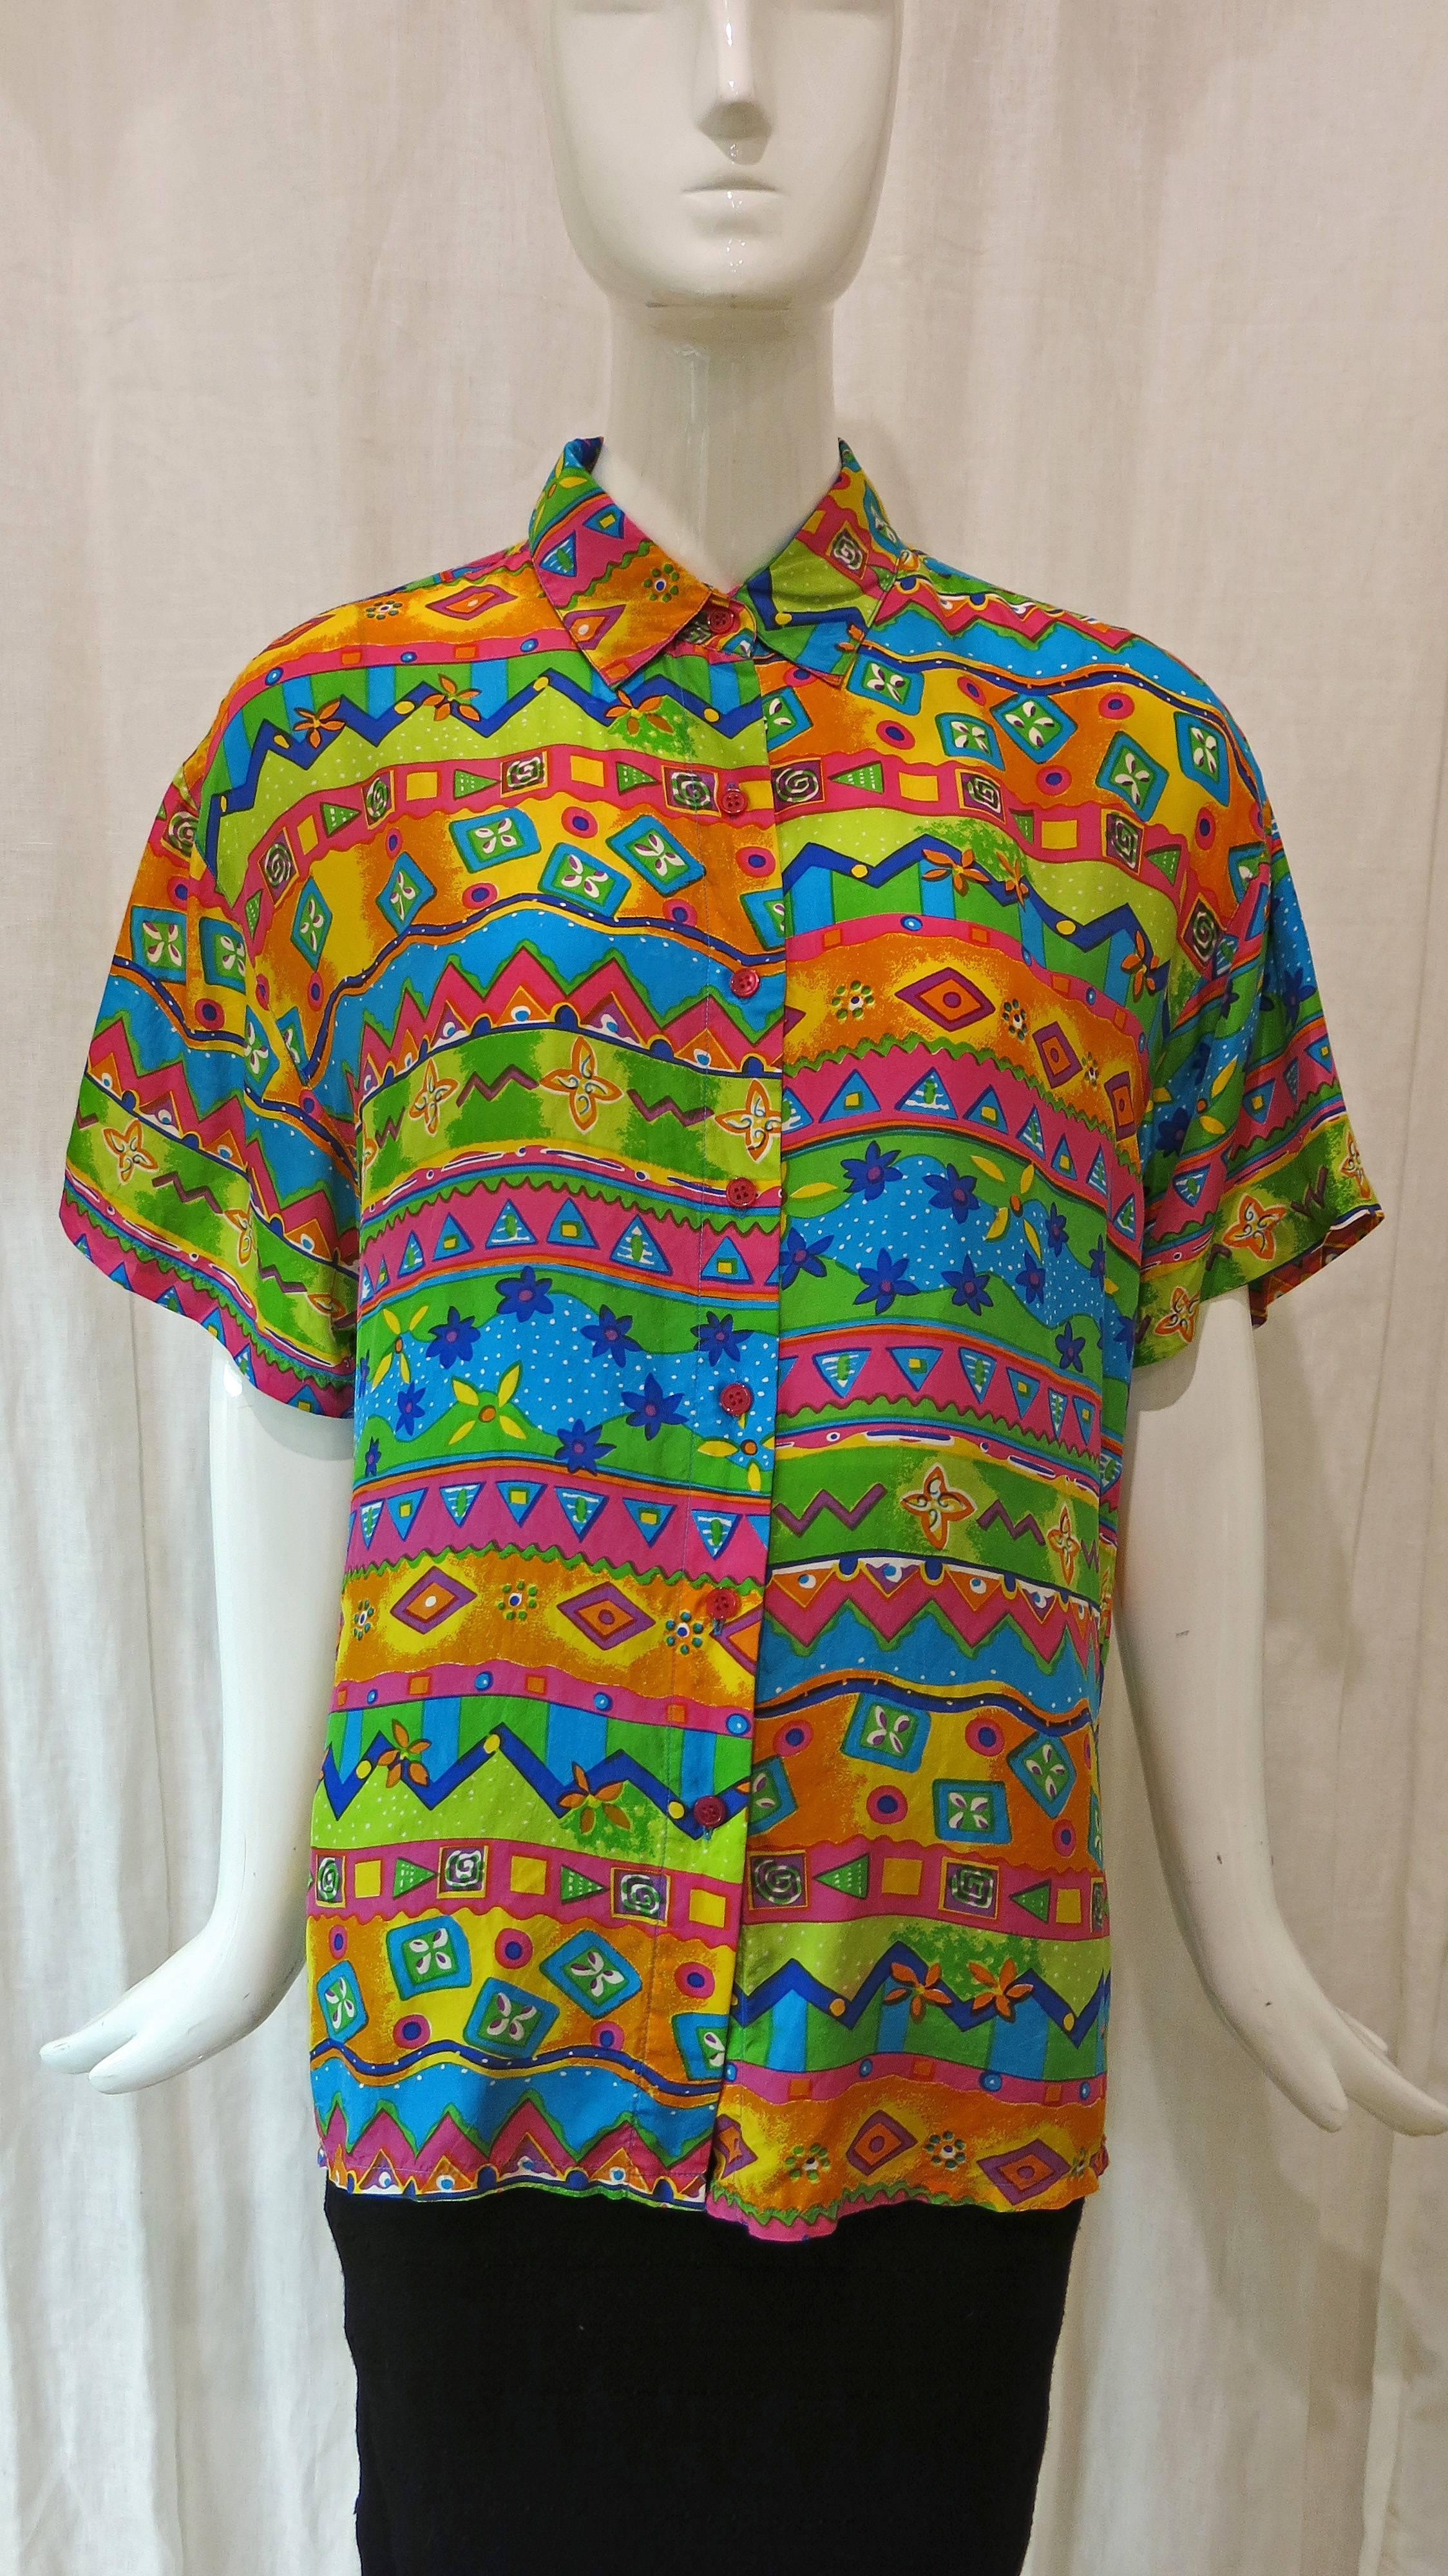 Vibrant patterned short sleeve button down blouse. Collared and made of silk this eye catching piece will brighten up your wardrobe. 

Known best for his beautifully crafted gowns and formalwear, Oscar de la Renta had a long and illustrious career.